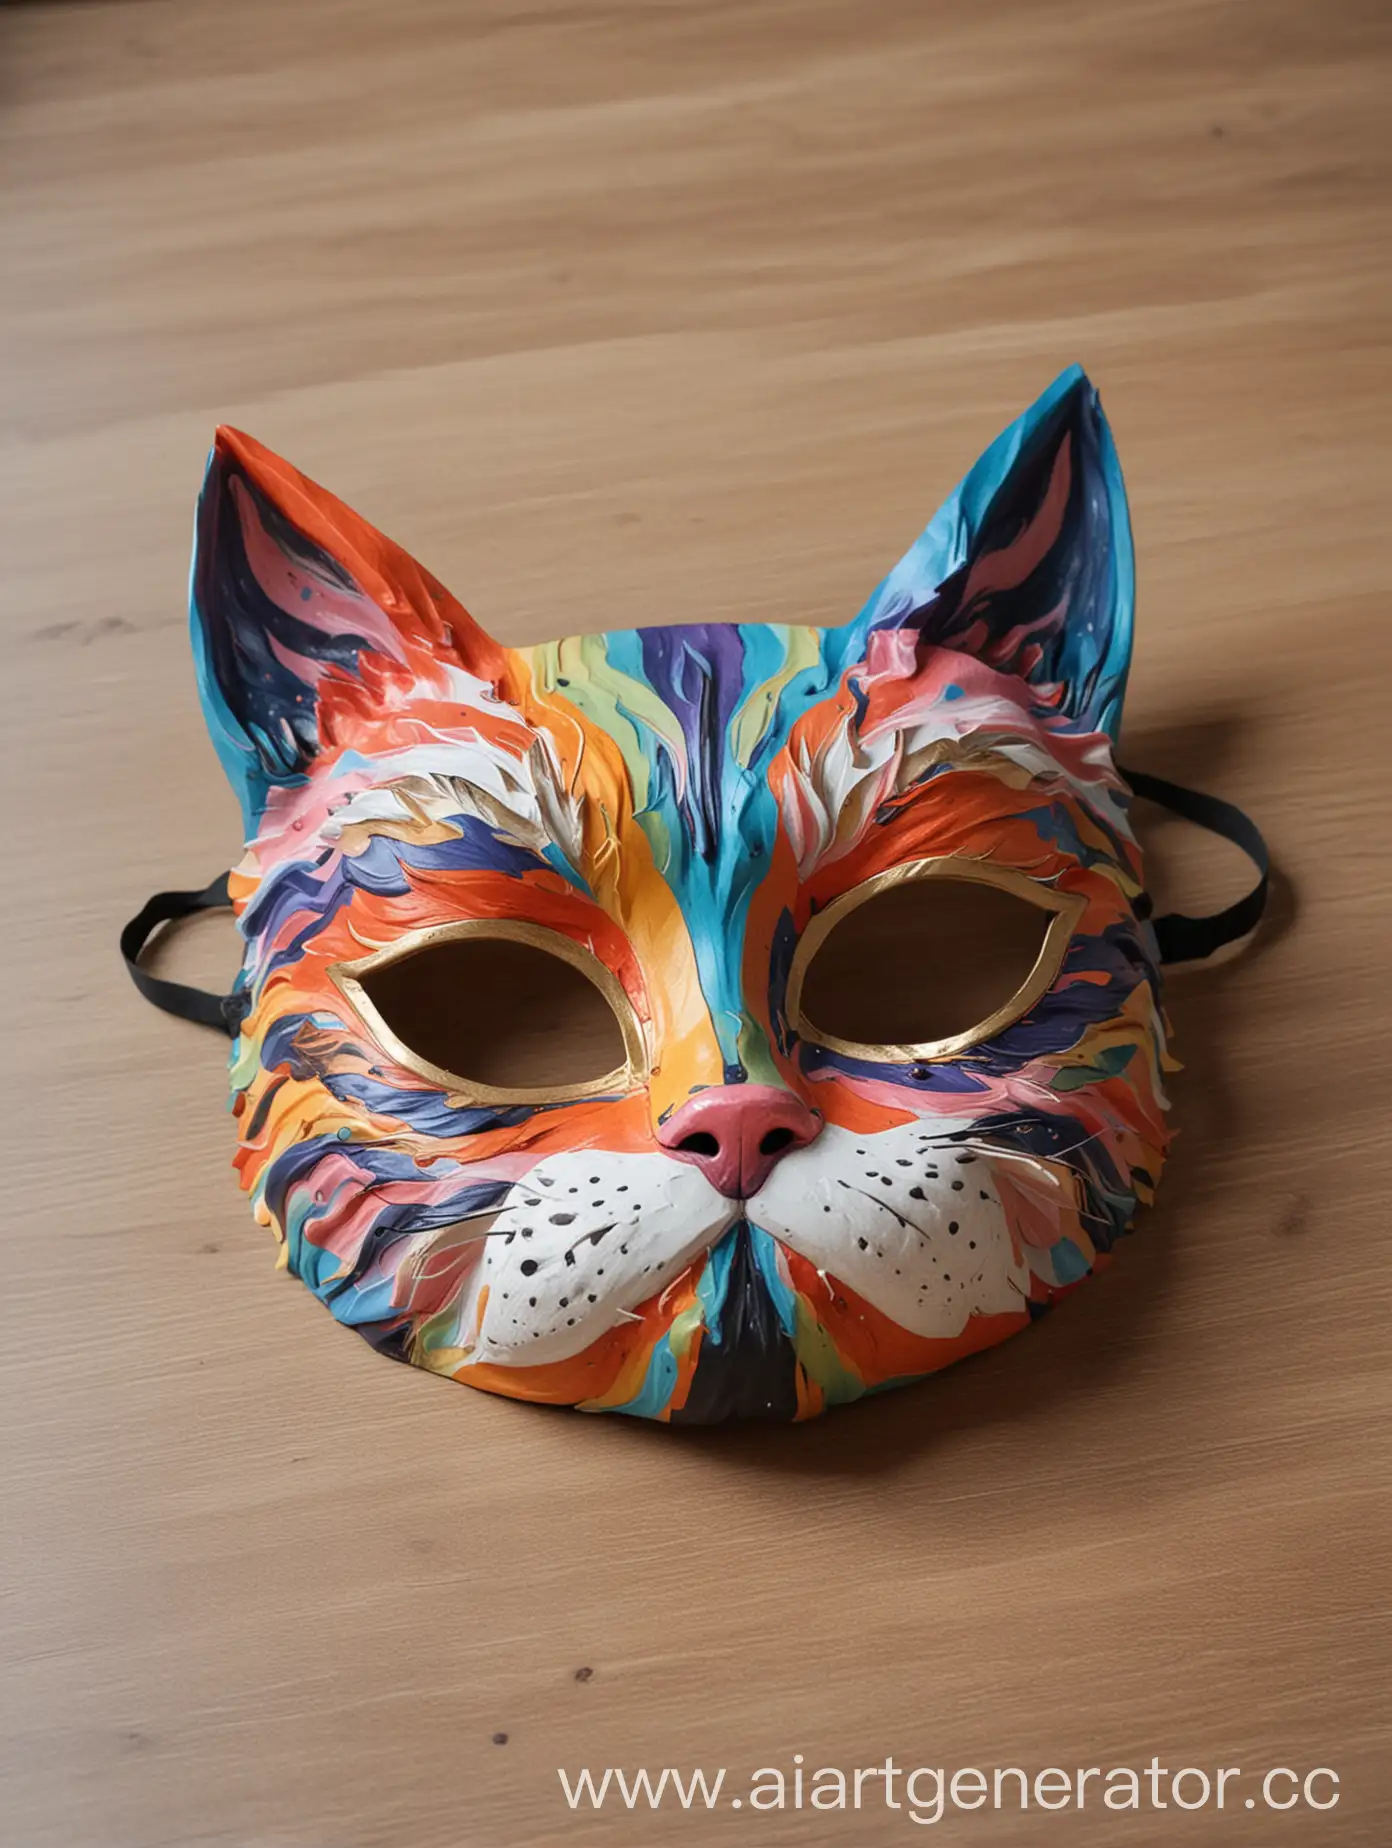 A multicolored cat mask is lying on the table